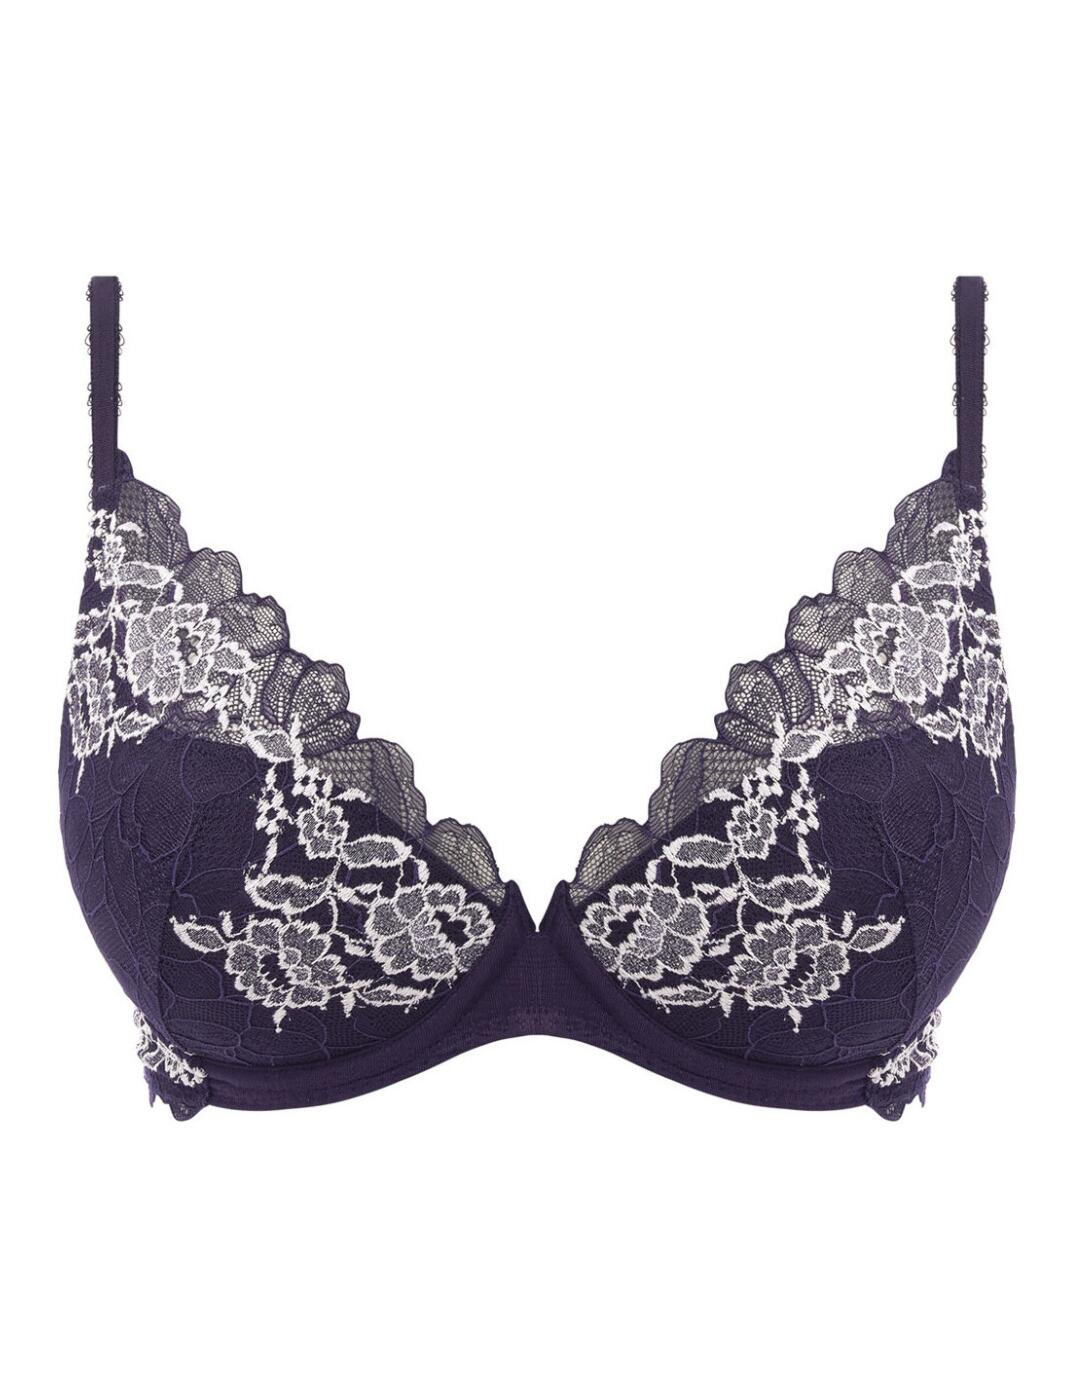 Wacoal Lace Perfection Underwired Plunge Bra - Belle Lingerie | Wacoal ...